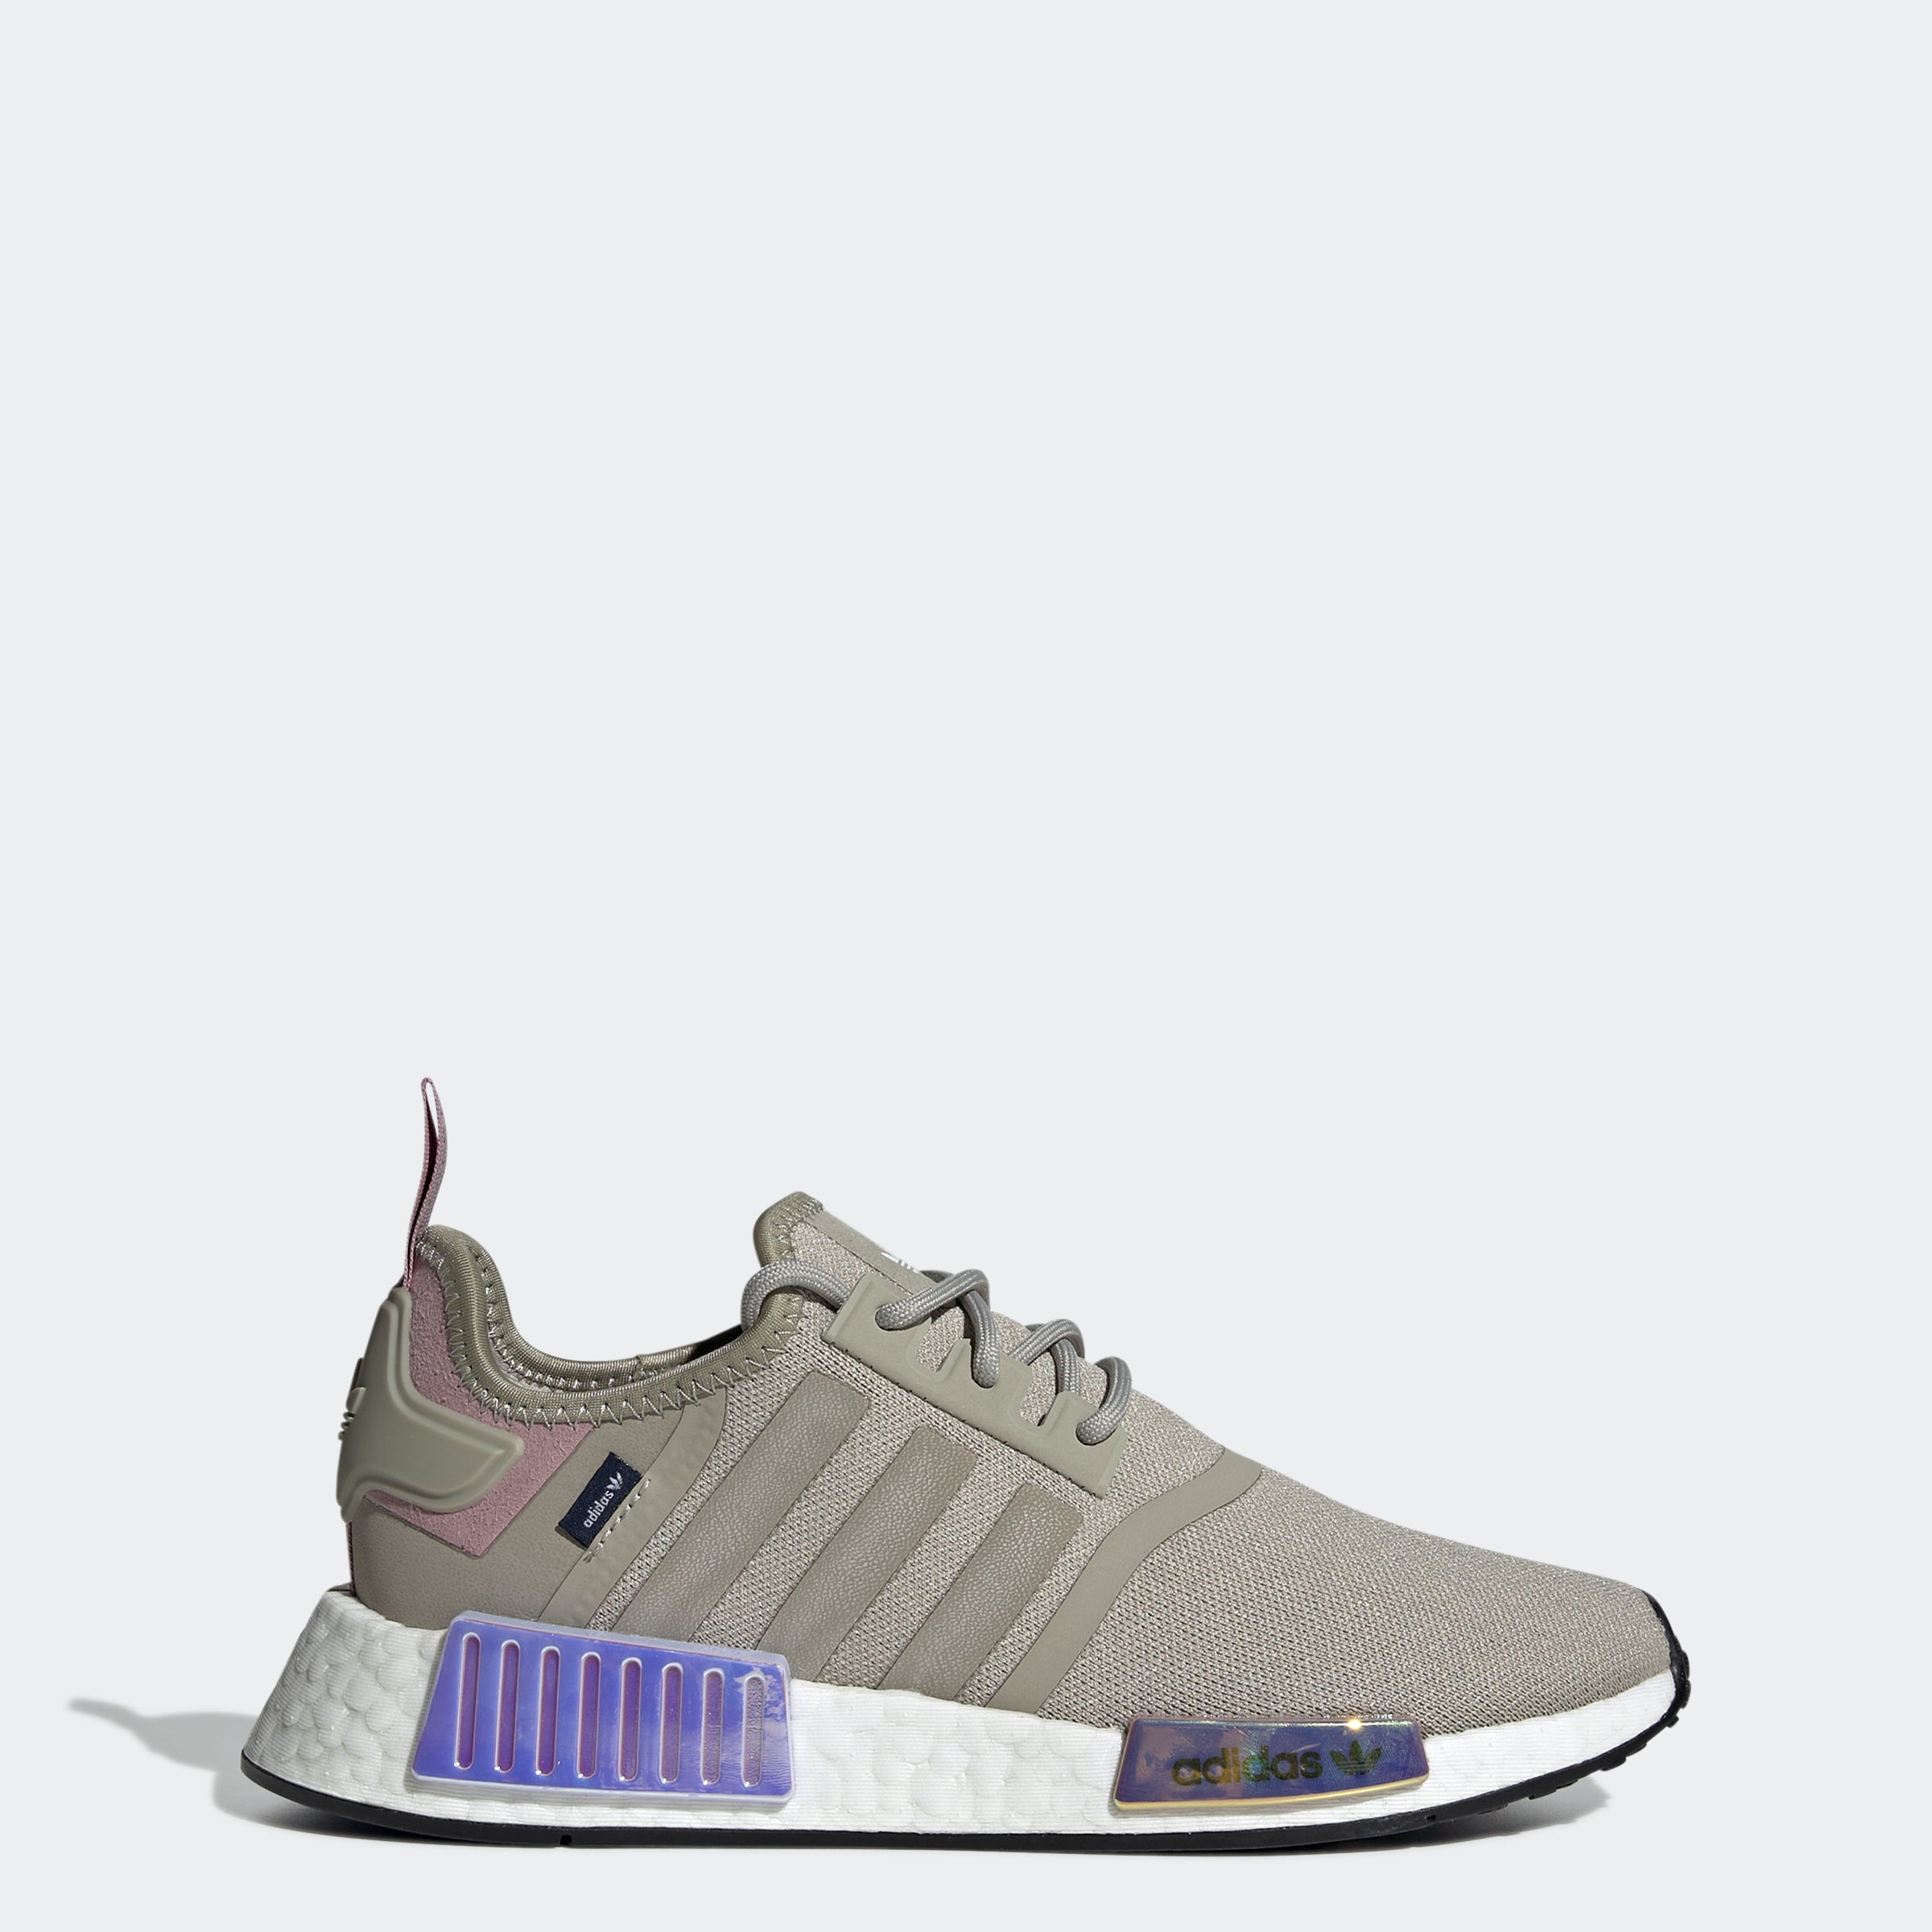 Outlaw patient fjende Women's adidas NMD_R1 Shoes Feather Grey GY8538 | Chicago City Sports